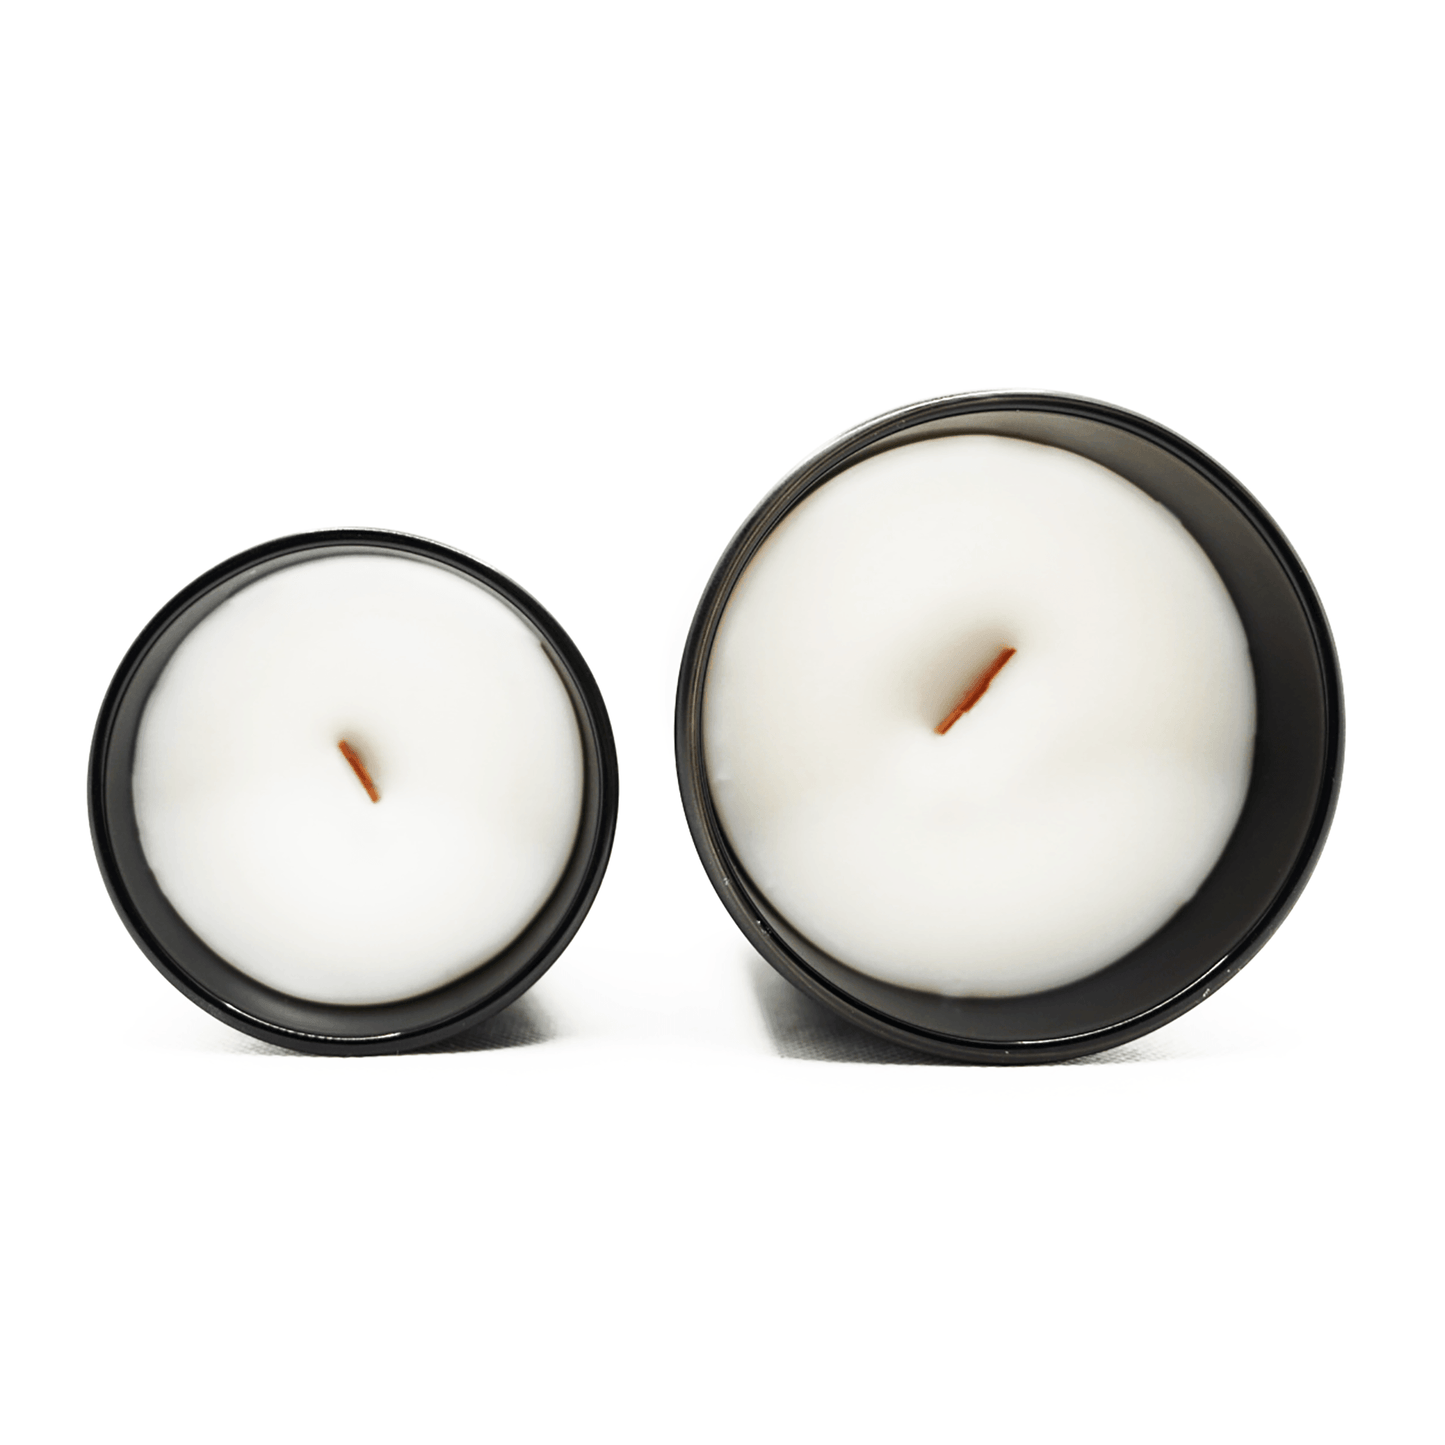 Best In Class Ass - Woodwick Candle - BADWAX